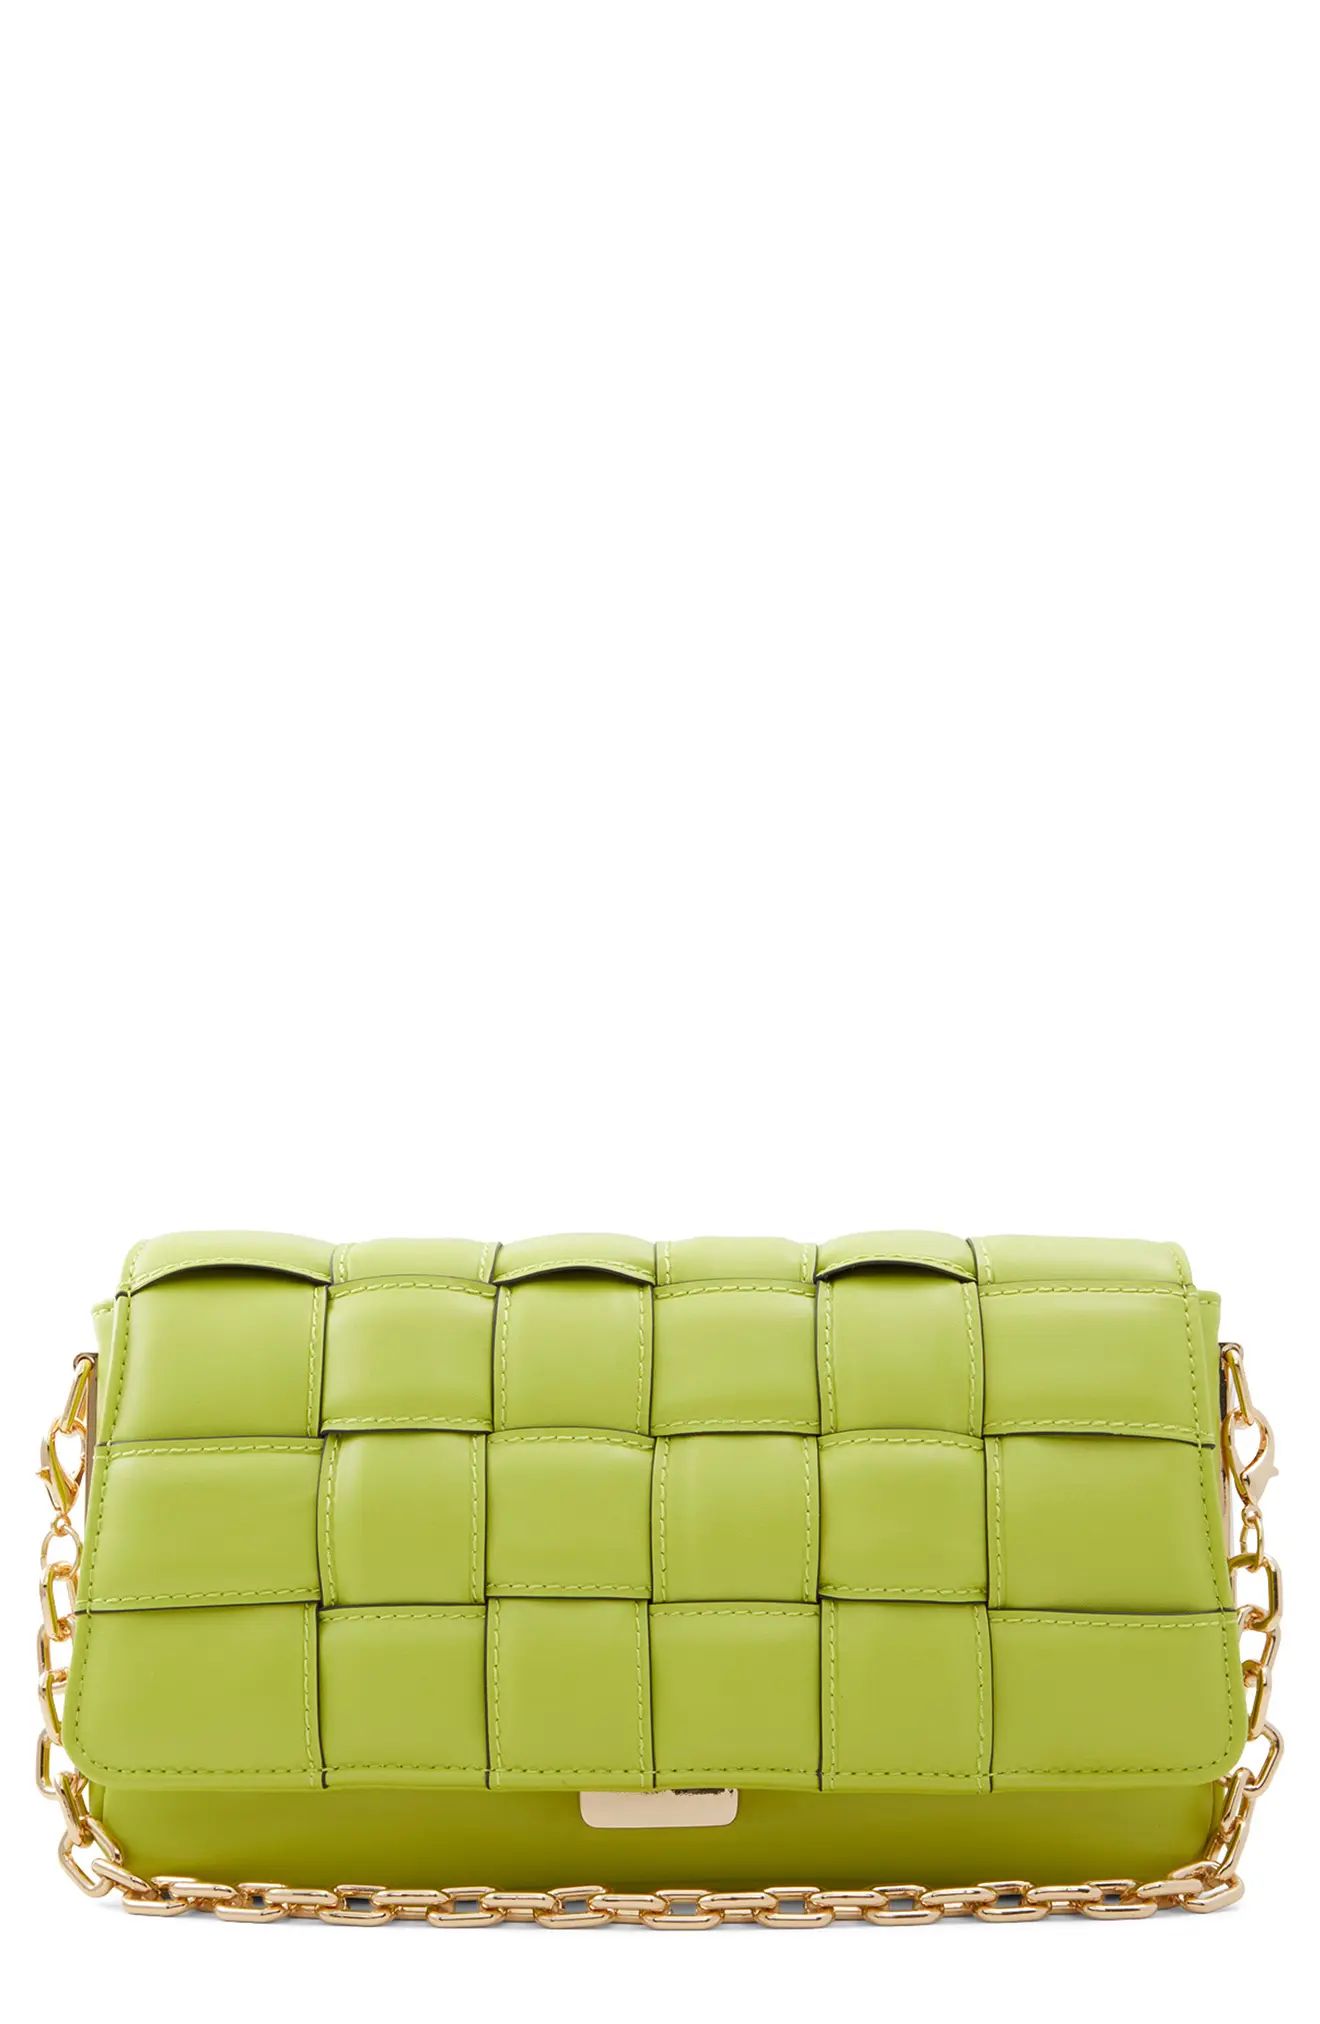 ALDO Wynonna Woven Faux Leather Flap Shoulder Bag in Green at Nordstrom | Nordstrom